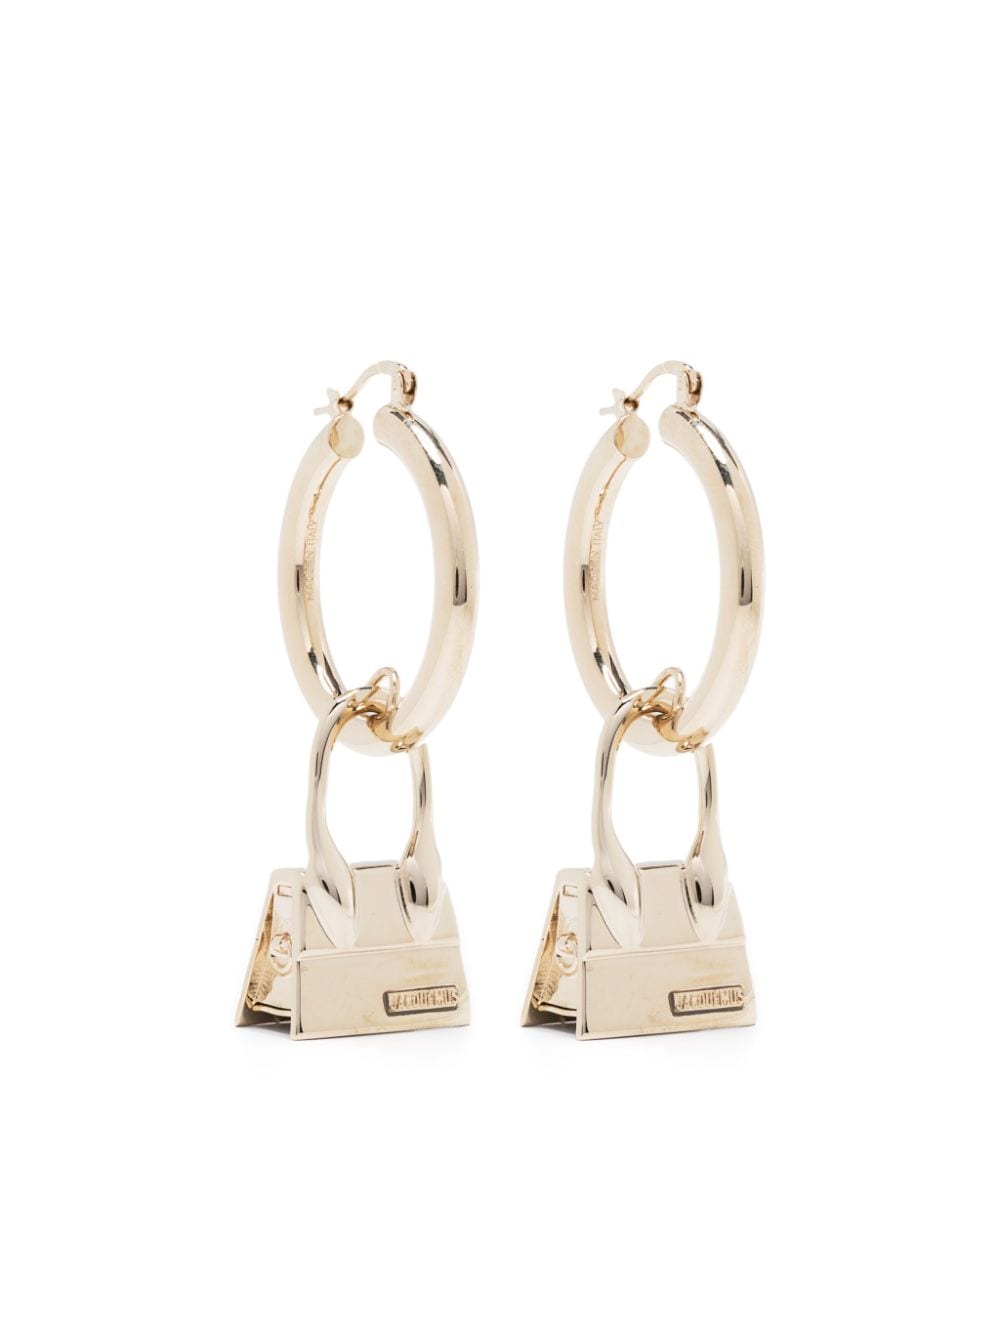 Jacquemus Les Creoles Chiquito hoop earrings - Gold